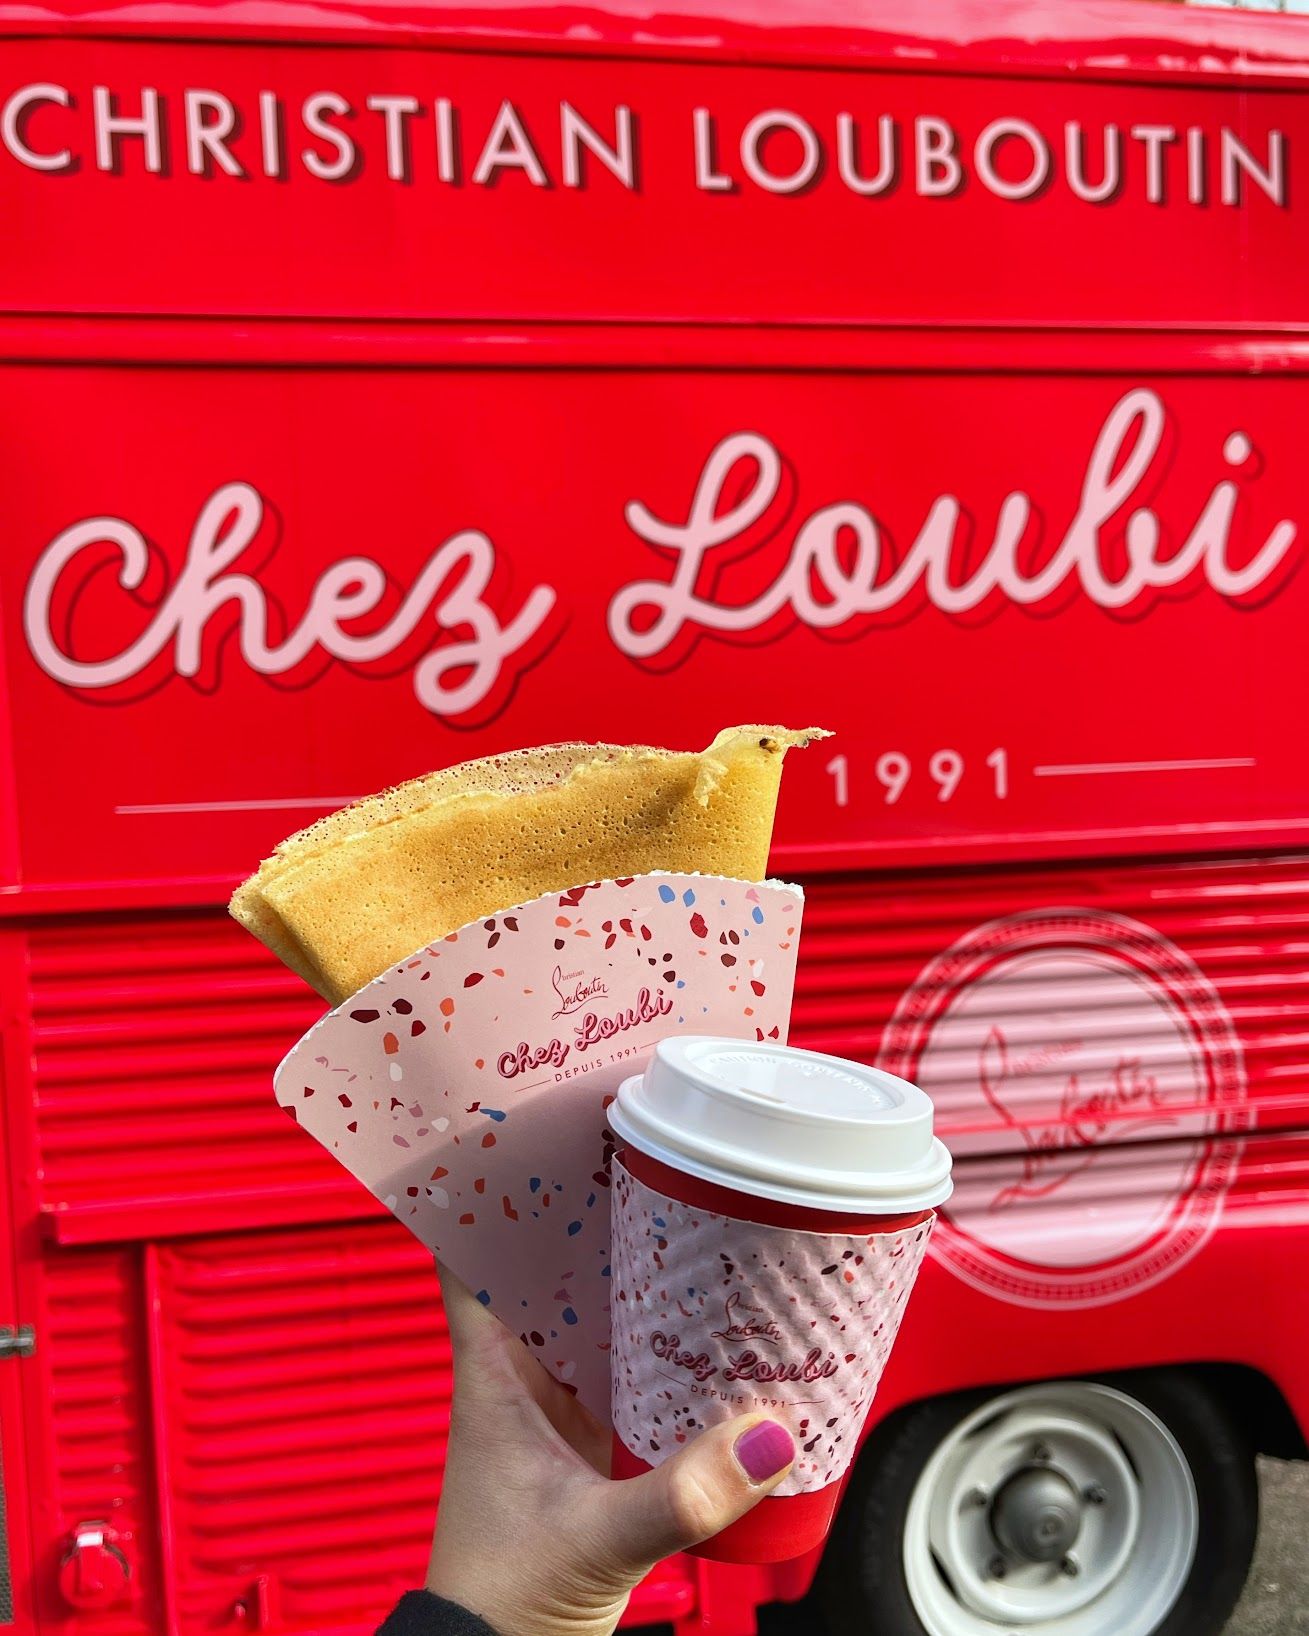 Christian Louboutin complimentary hot chocolate and crepe for experiential marketing activation.